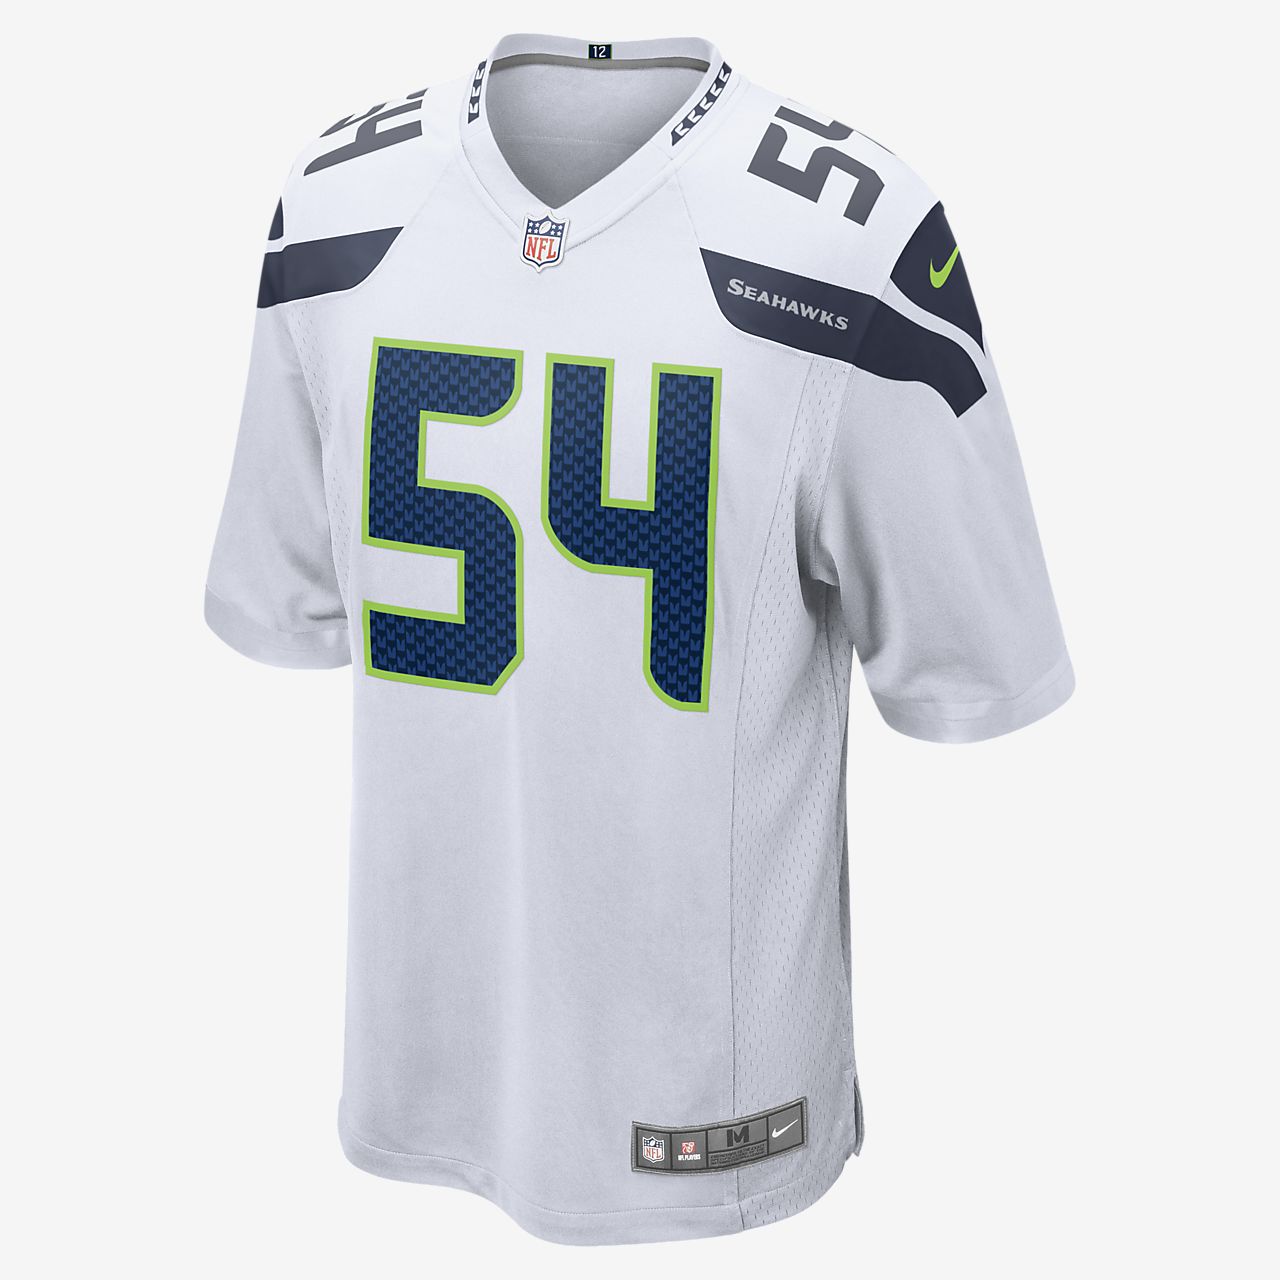 bobby wagner jersey Cheaper Than Retail Price> Buy Clothing ...